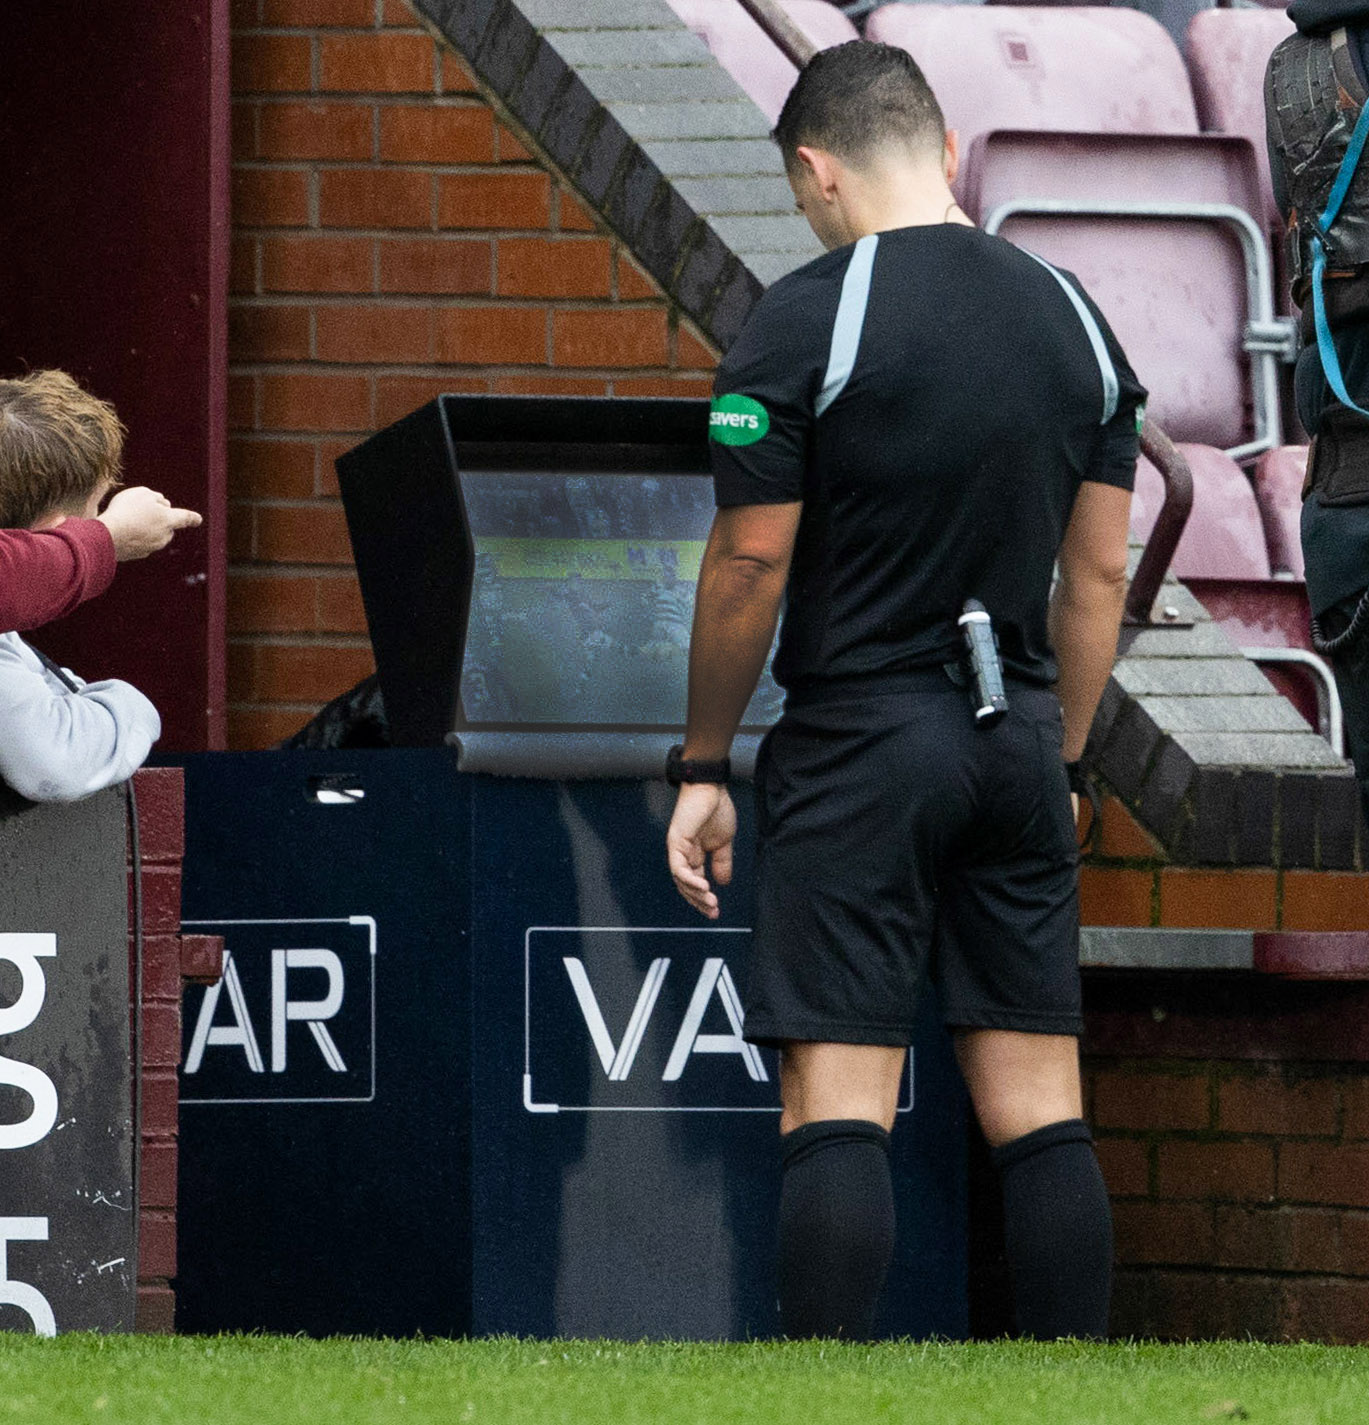 VAR: Referee consulted monitor before awarding penalty to Hearts.